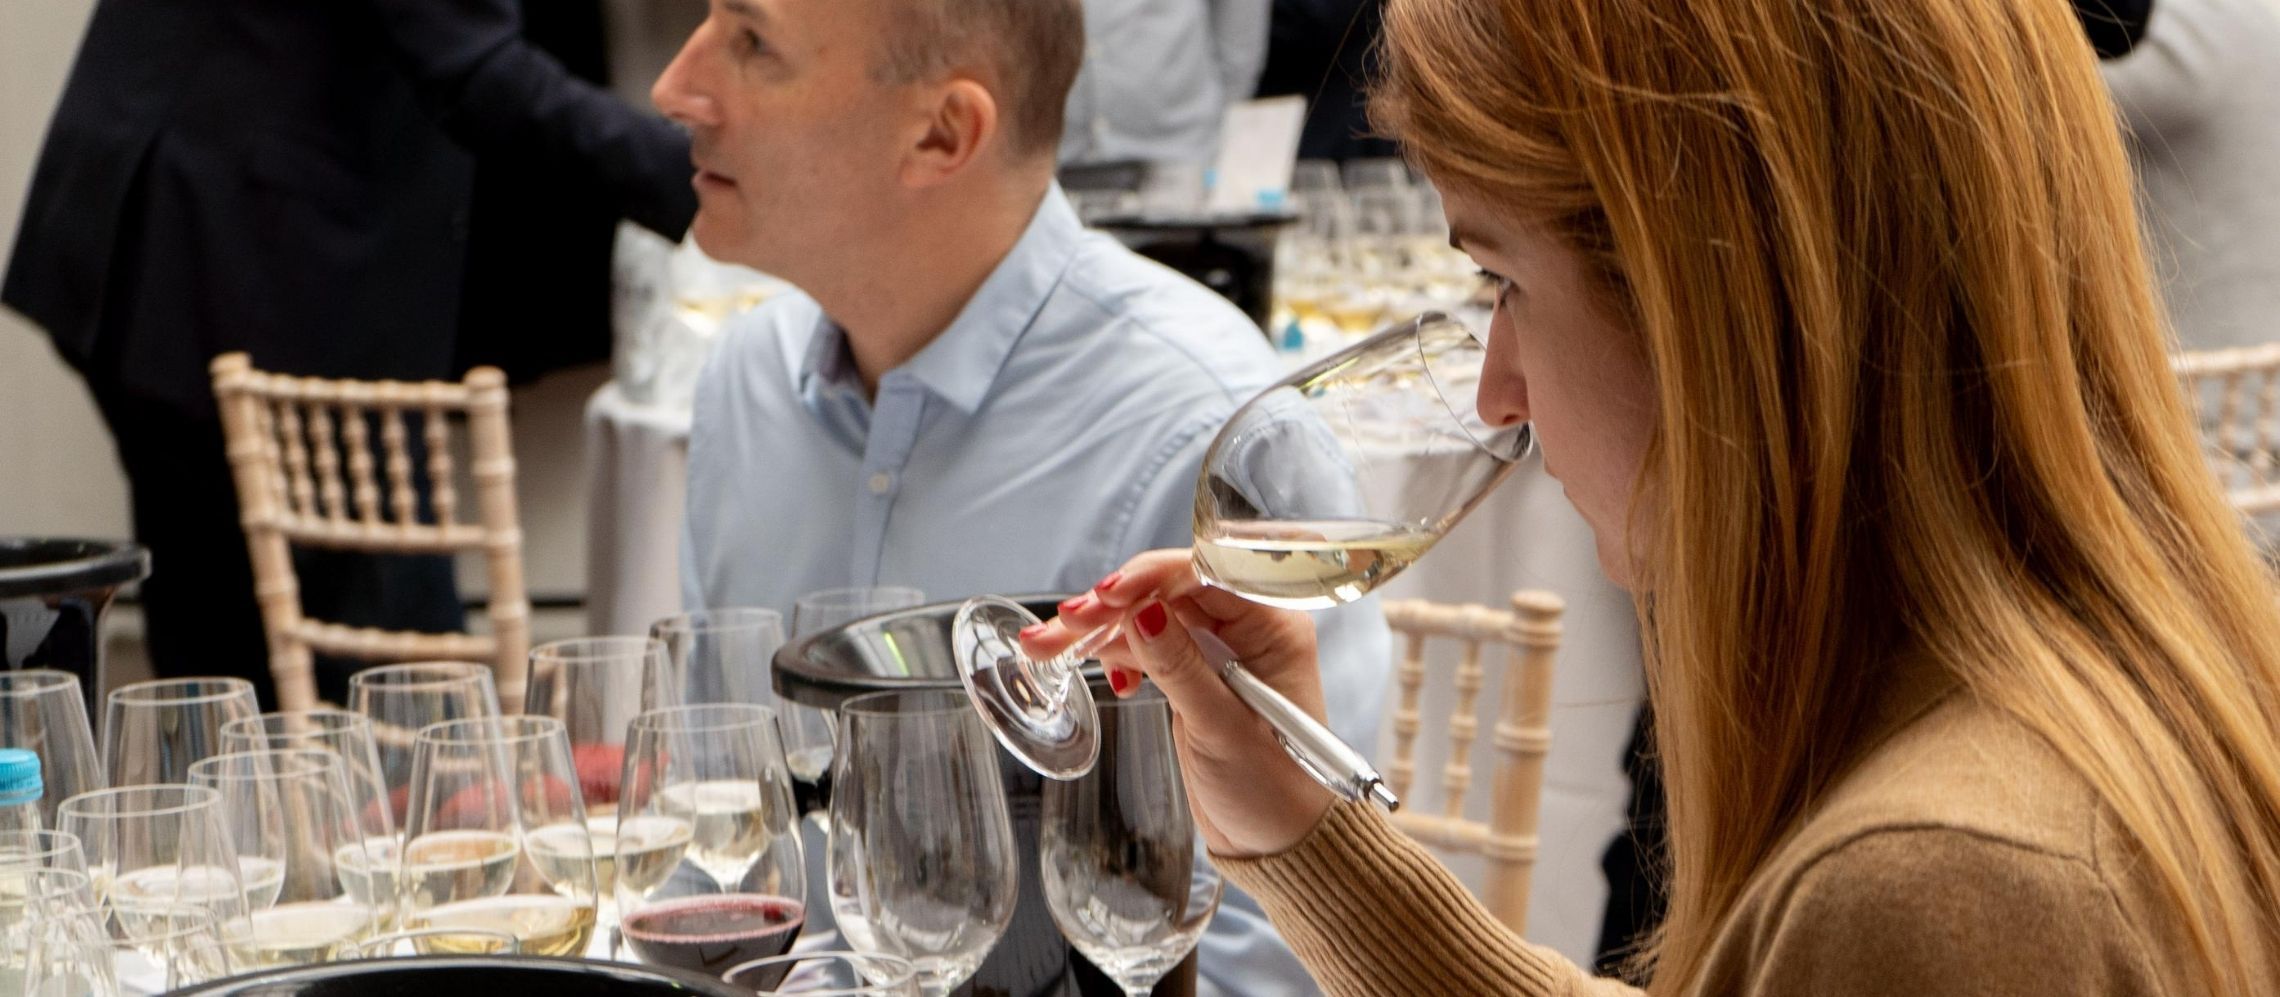 Photo for: London Wine Competition 2021 Registrations Are Open